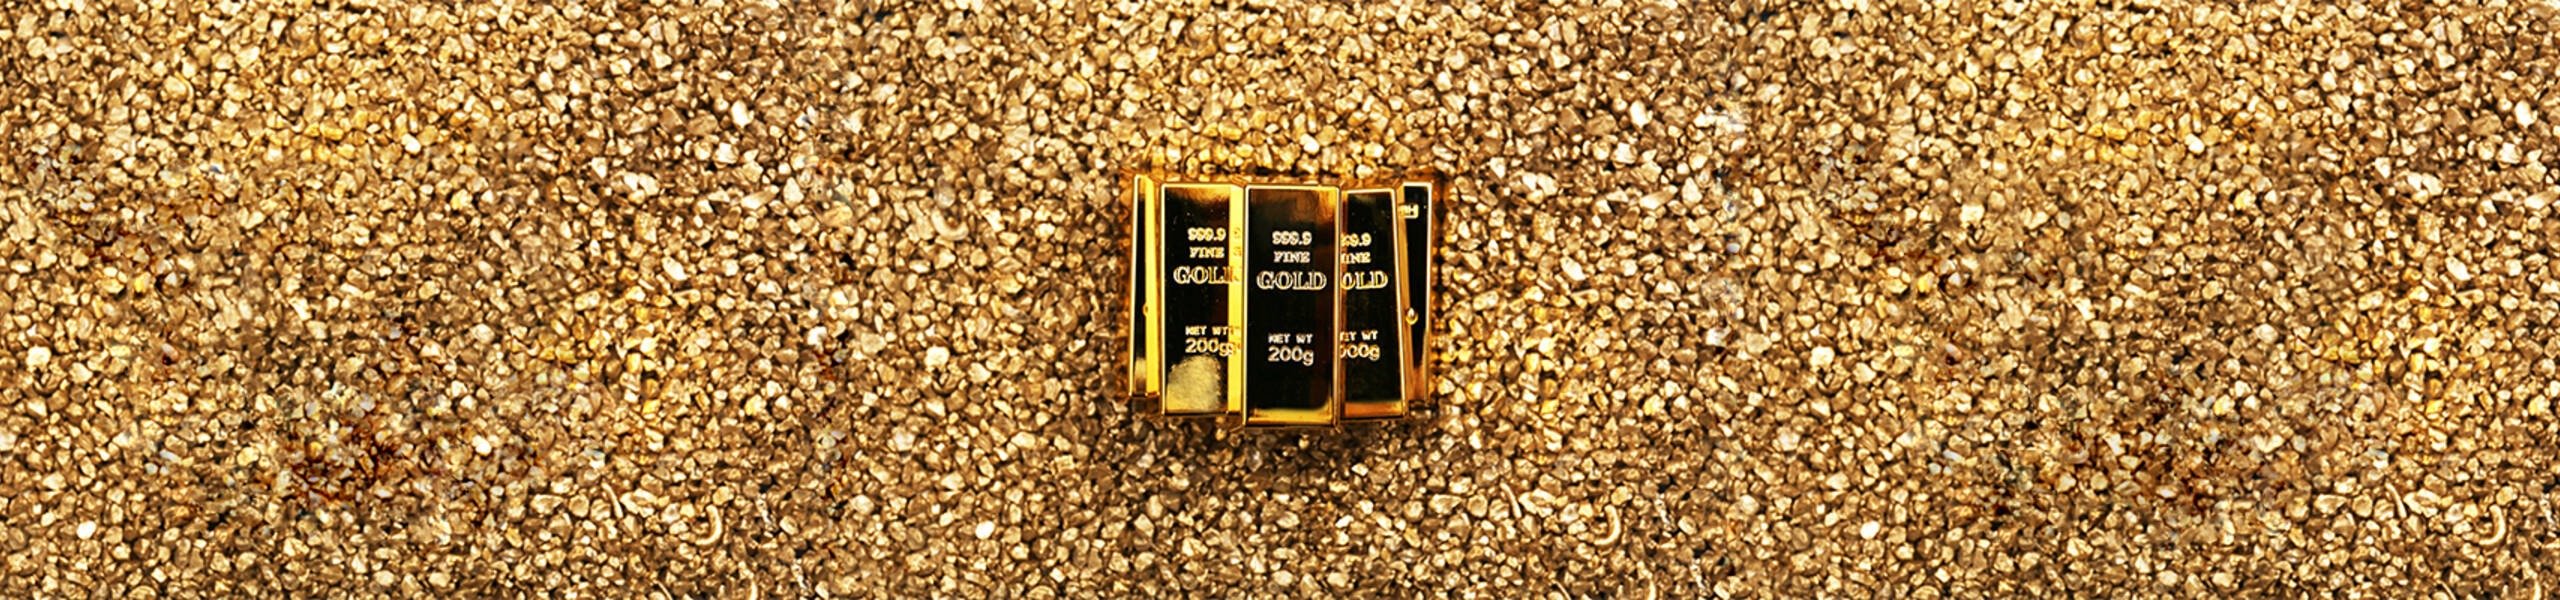 Gold: bears have great plans